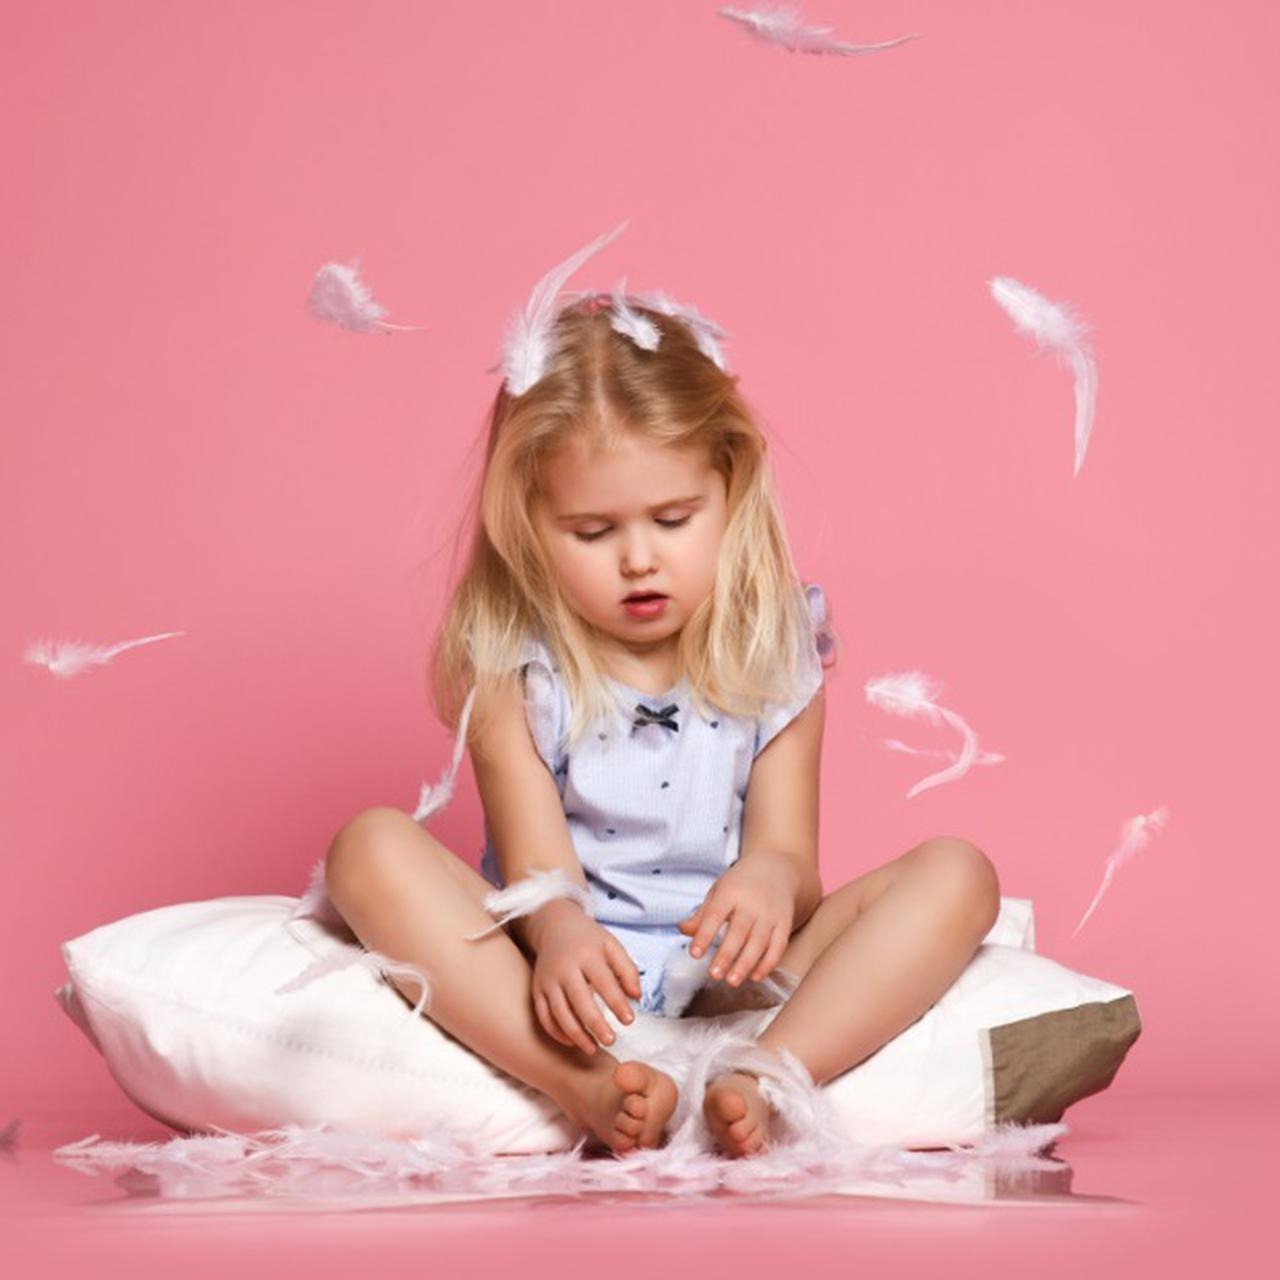 Funny-small-child-Light-hair-sitting-White-Pillow-feeling-Joy-catching-Feathers-having-fun-cute-Blue-eyed-girl